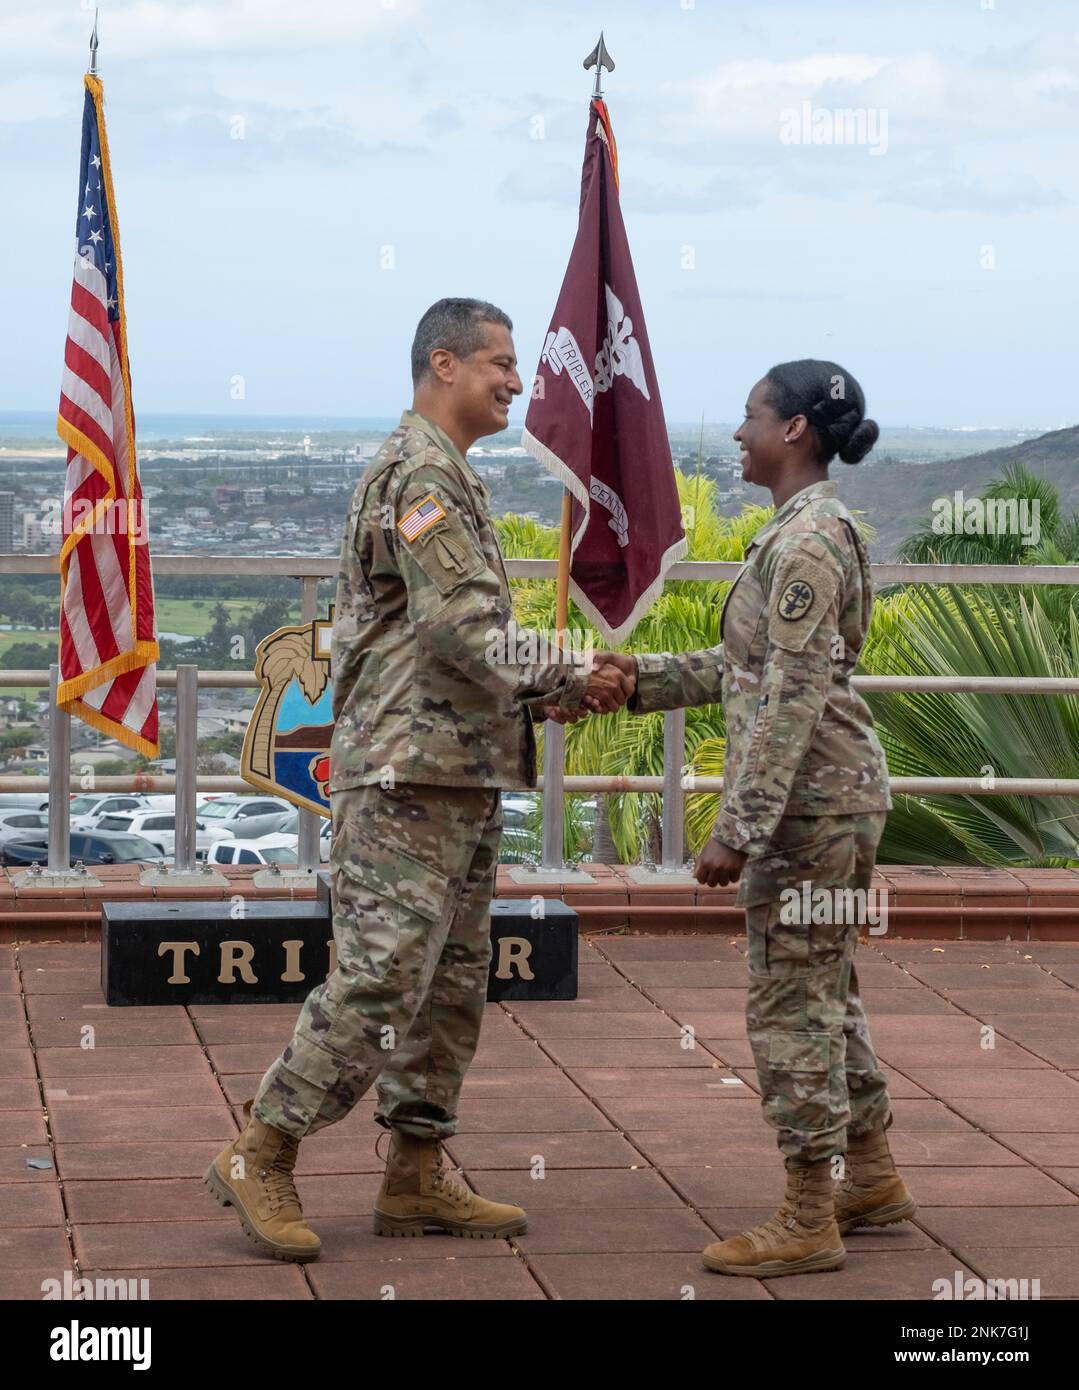 Commander coin was presented to Sgt. Kathryn Grant for her dedication during Tripler's U.S. Army Heritage Day. Stock Photo